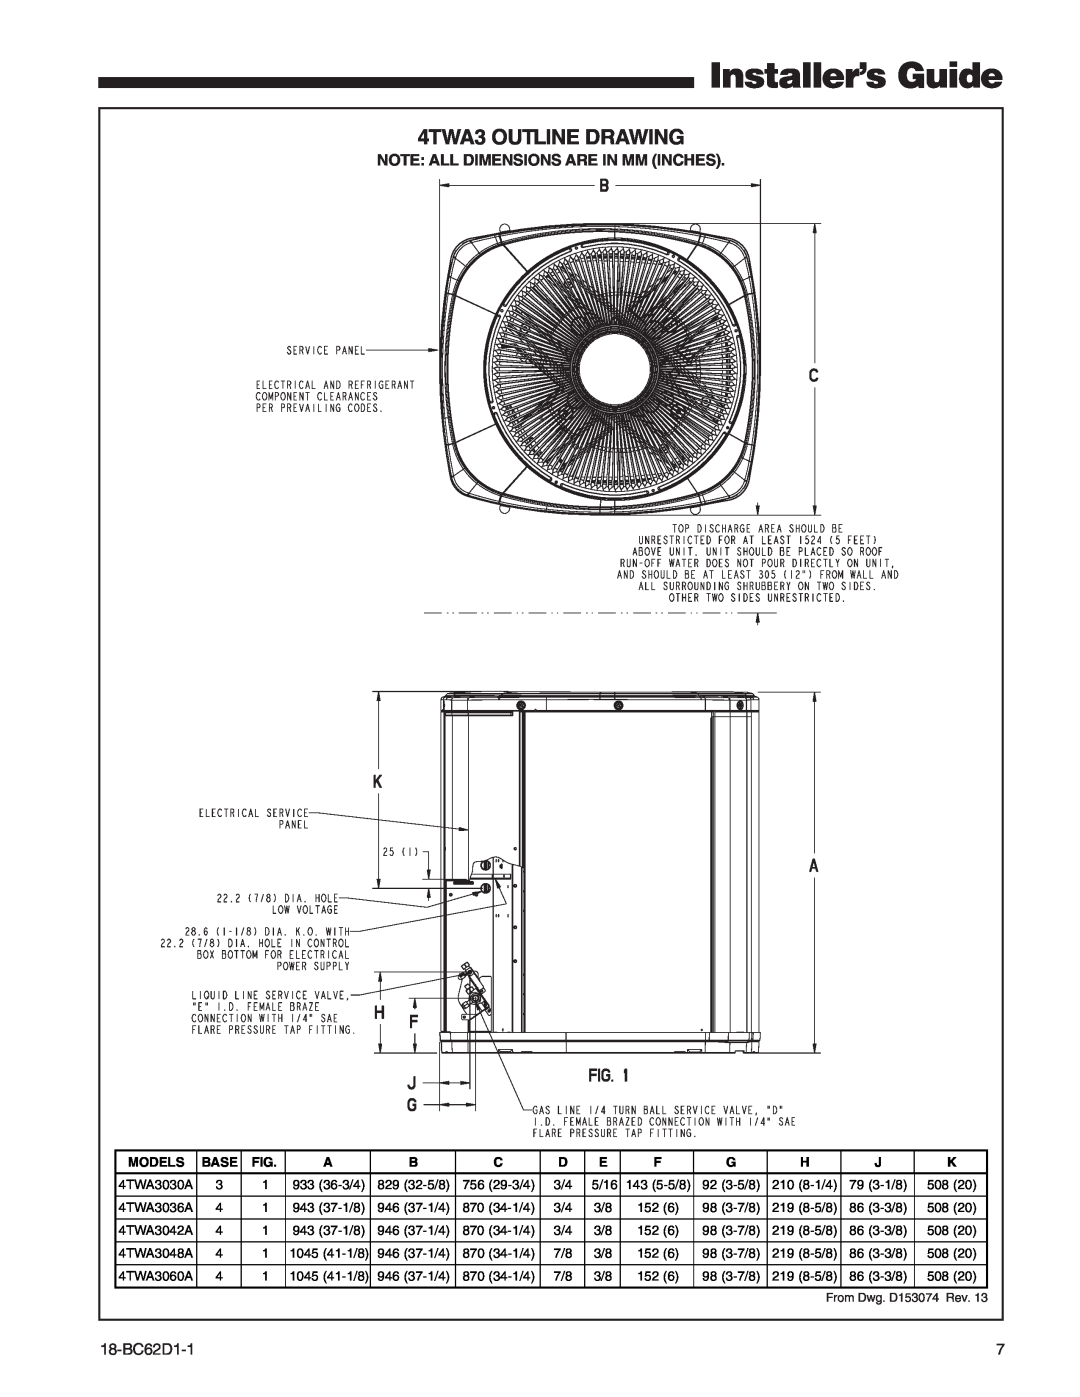 Trane 4TWA3 manual Installer’s Guide, Note All Dimensions Are In Mm Inches, 18-BC62D1-1, Models, Base 